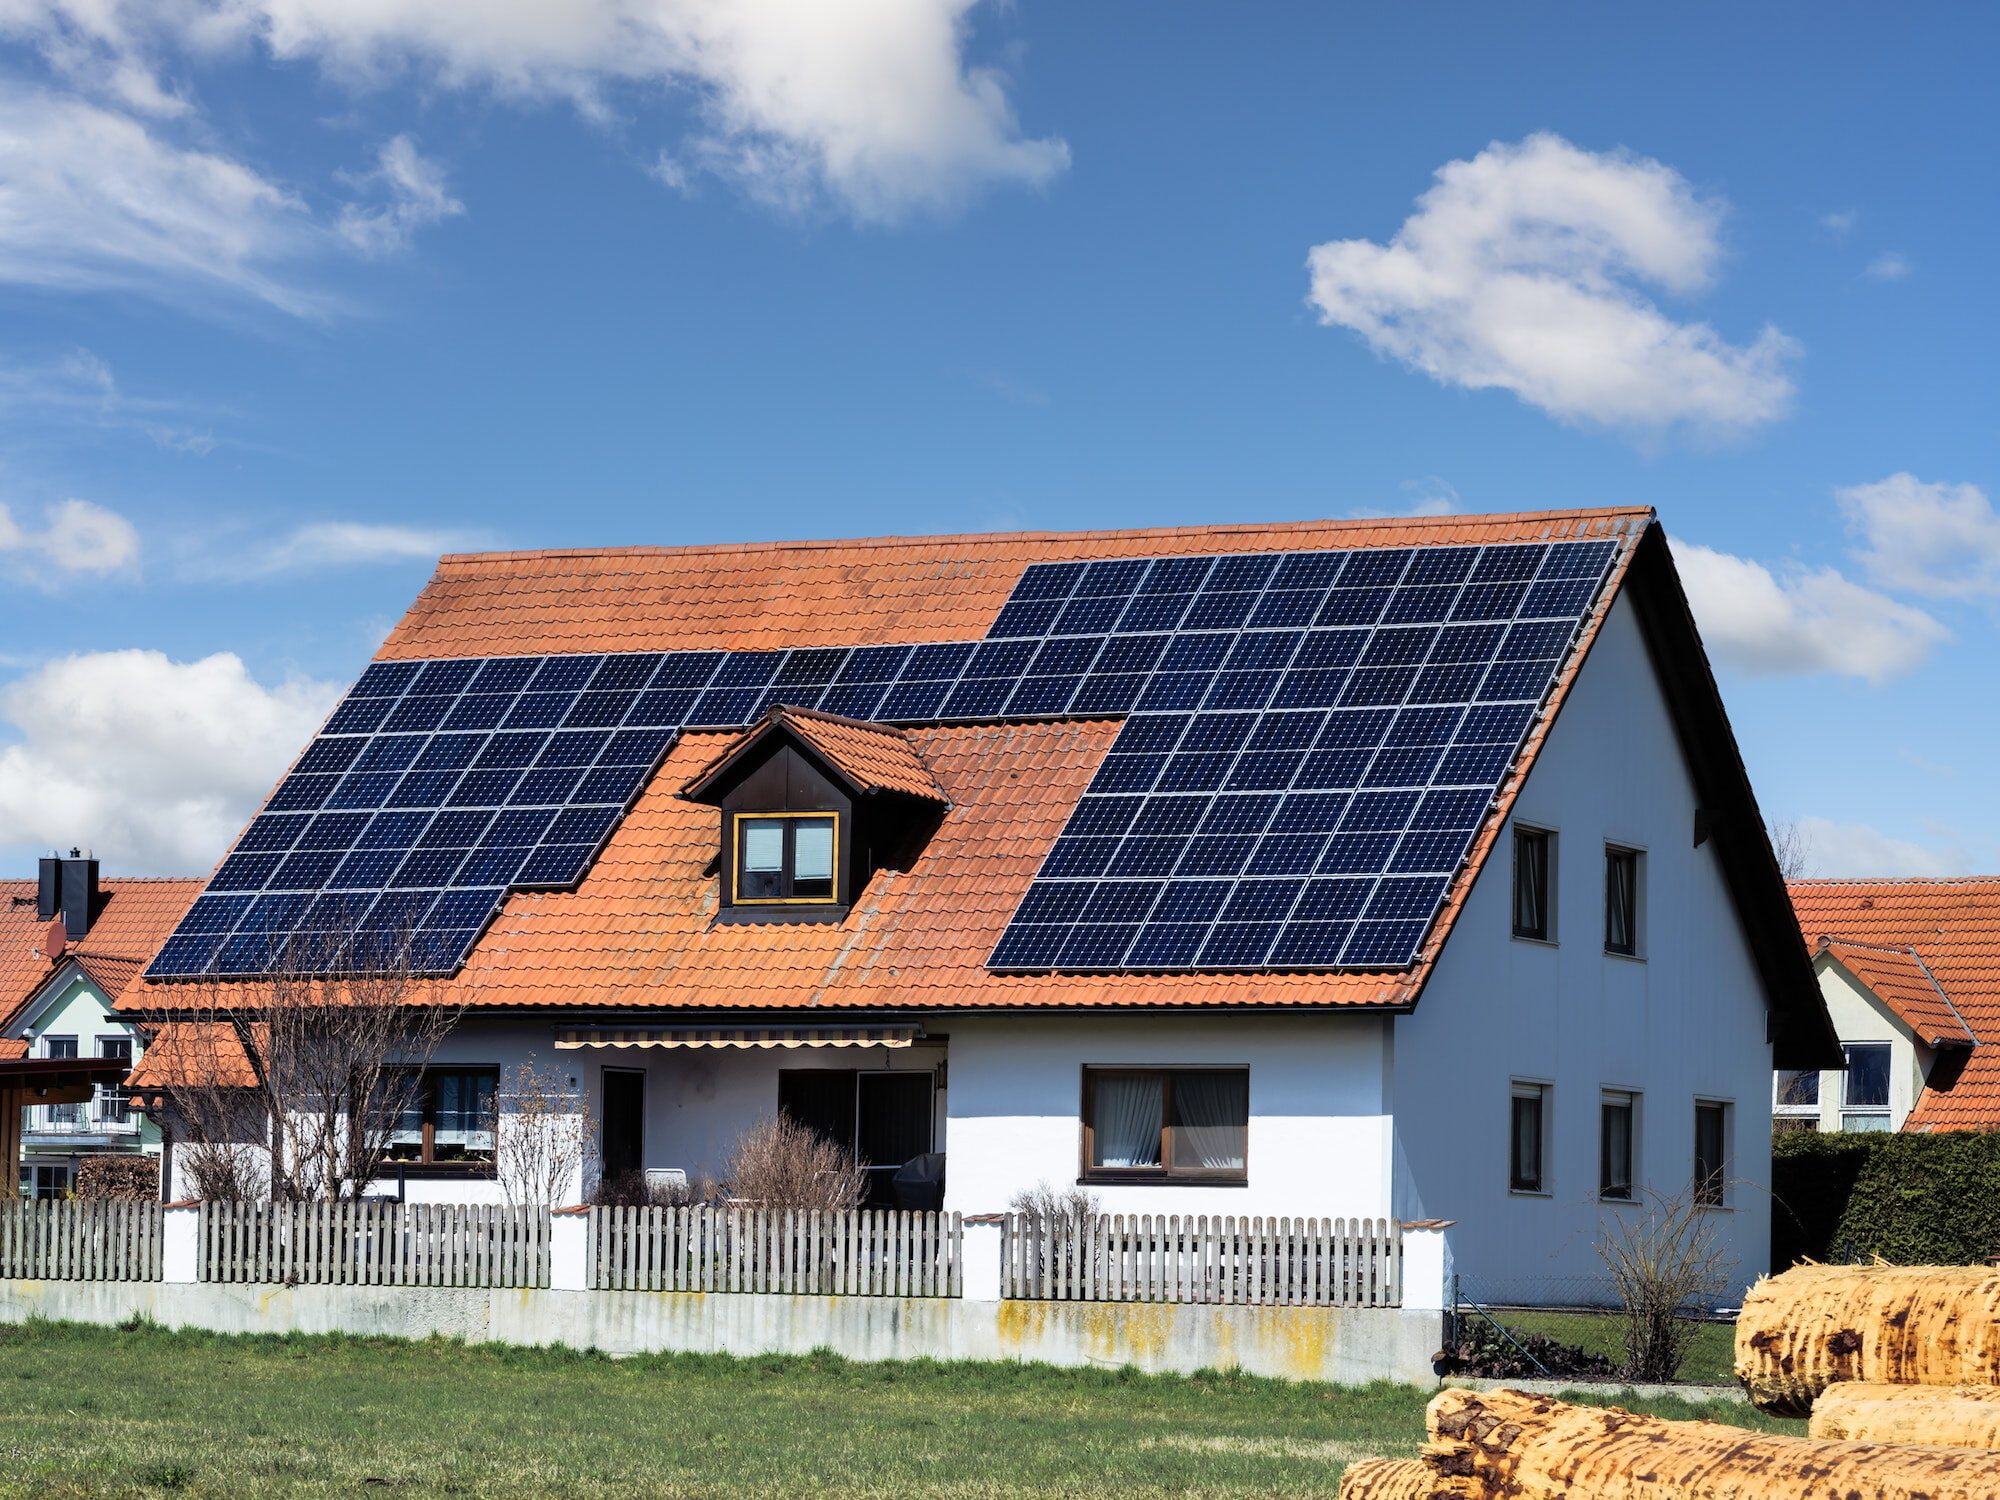 Innovative House with solar collectors- building modified by image editing